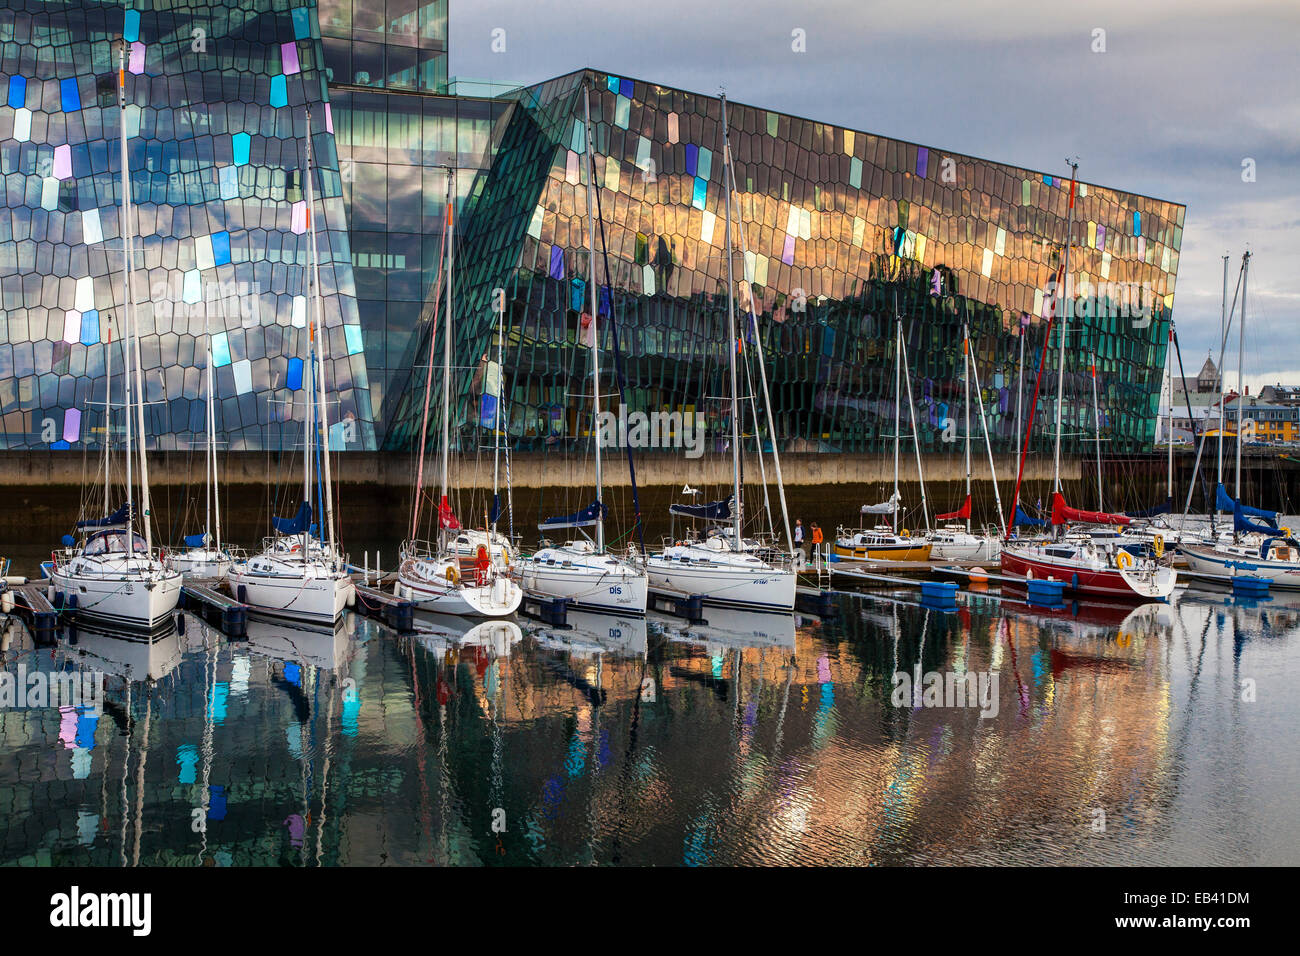 Harpa Concert Hall and Conference Centre on the Reykjavik waterfront, Iceland Stock Photo